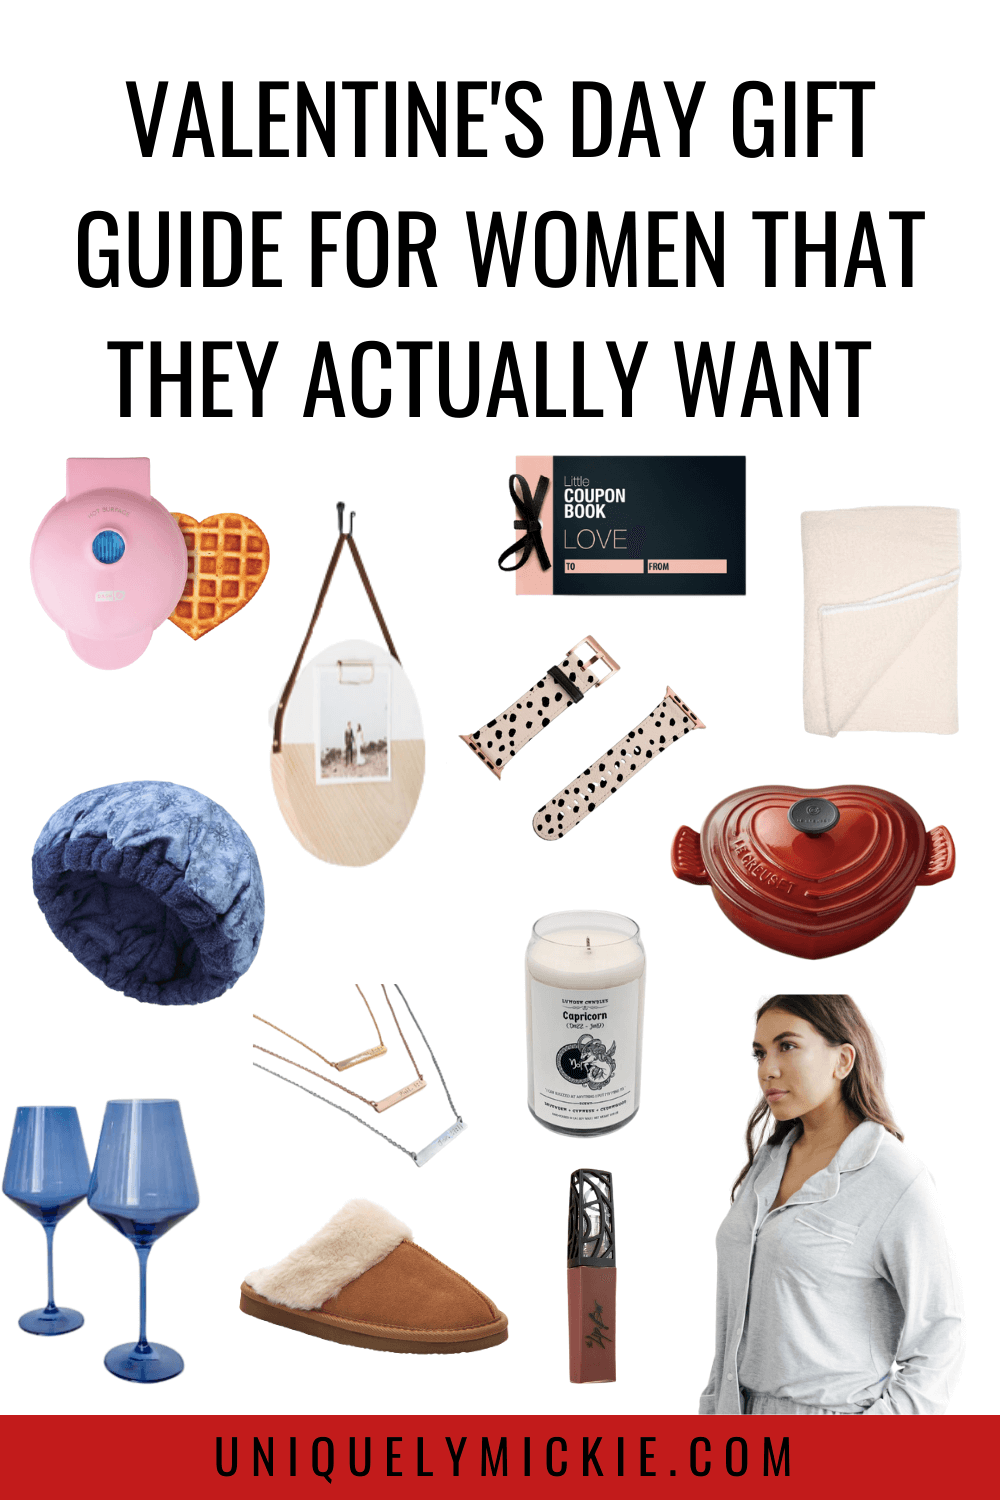 Valentine's Day Gift Guide for Her